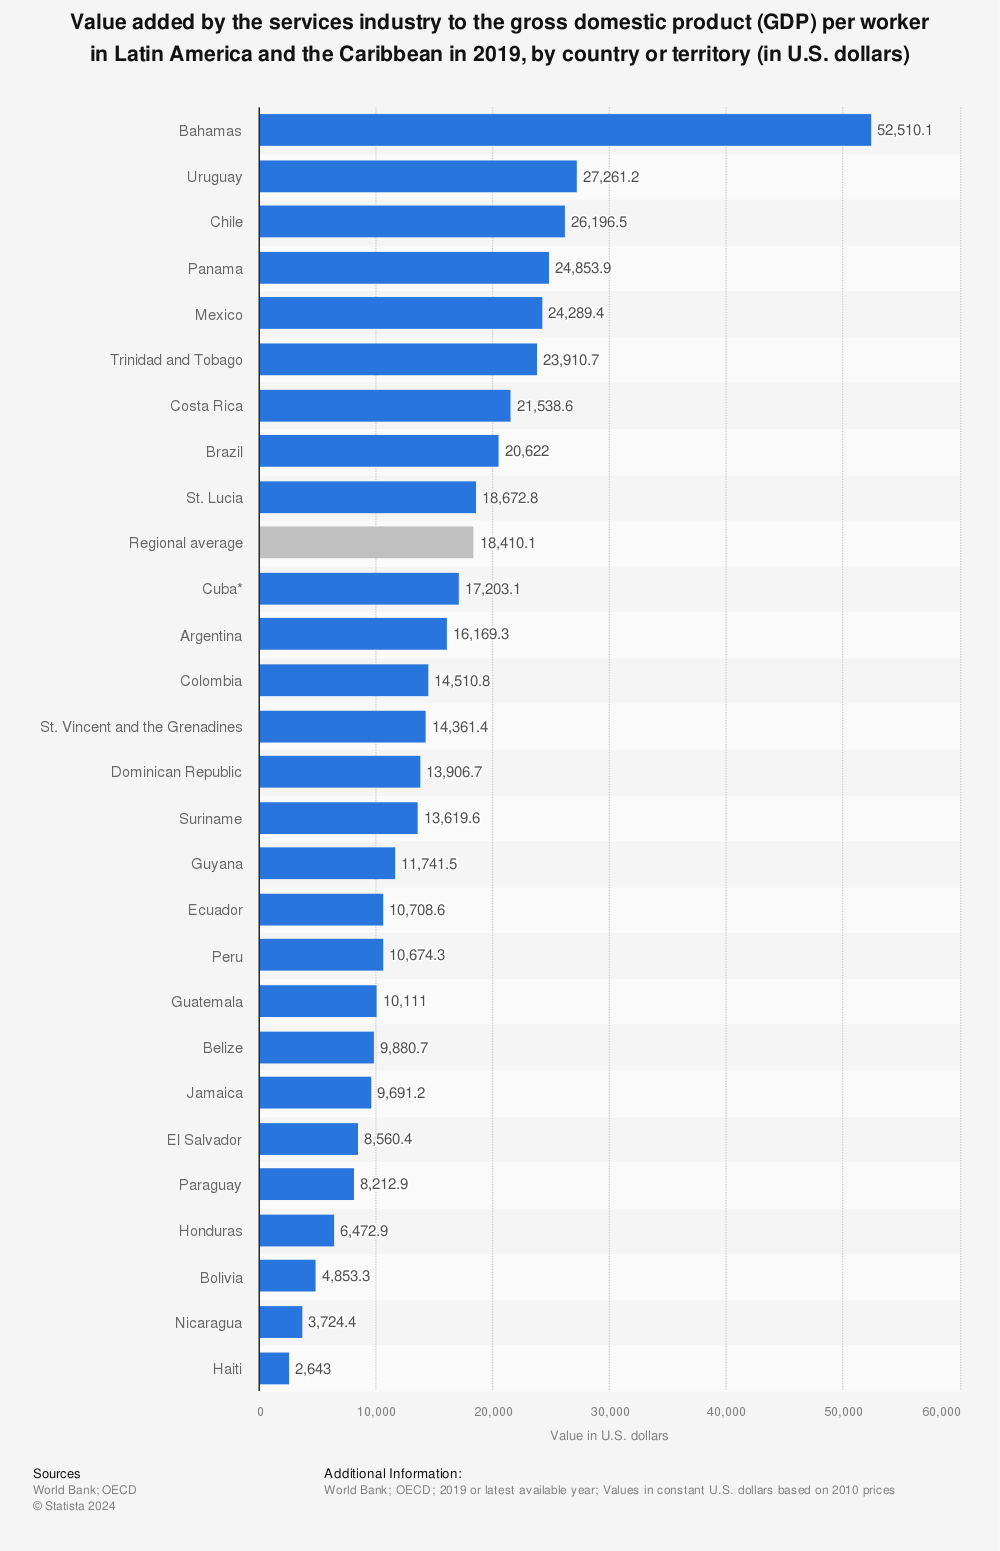 Statistic: Value added by the services industry to the gross domestic product (GDP) per worker in Latin America and the Caribbean in 2019, by country or territory (in U.S. dollars) | Statista